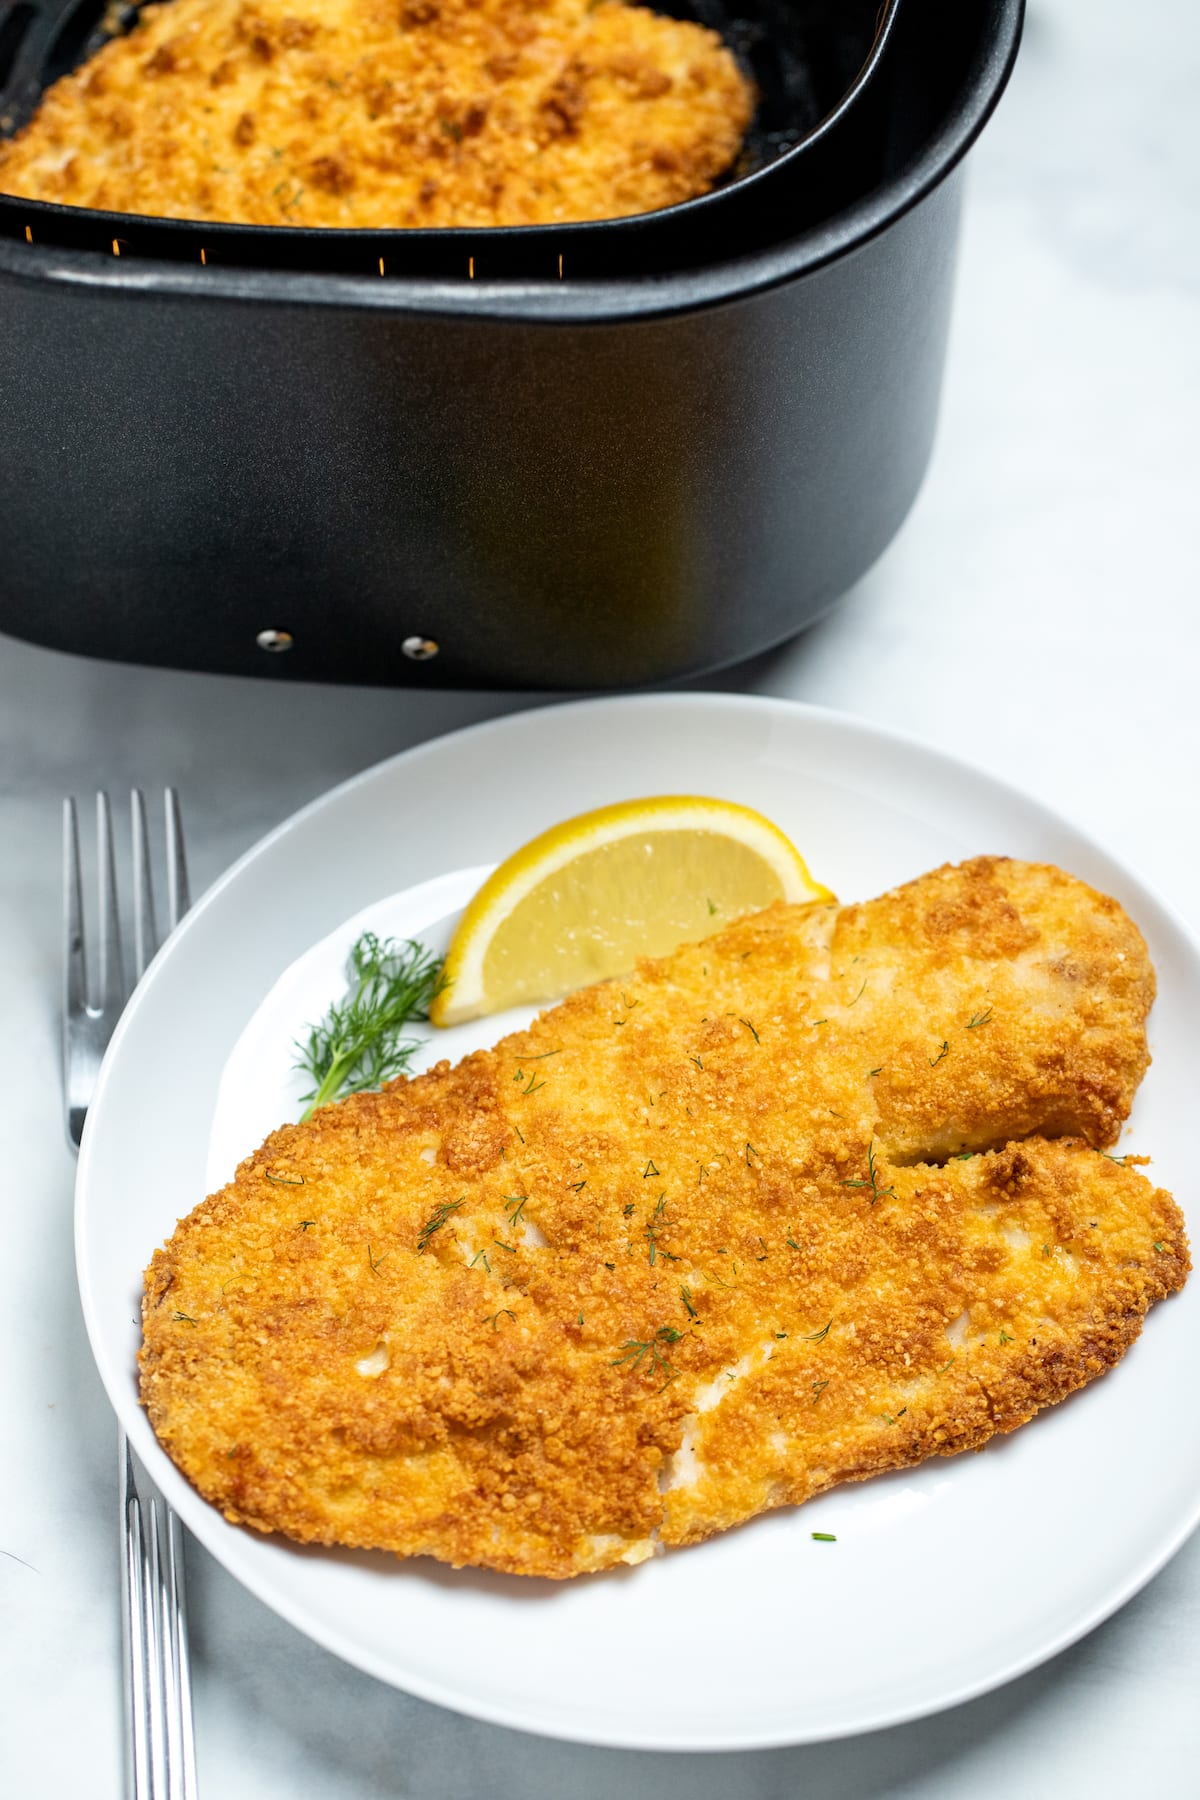 A piece of breaded tilapia on a plate with a lemon wedge in front of an air fryer basket.